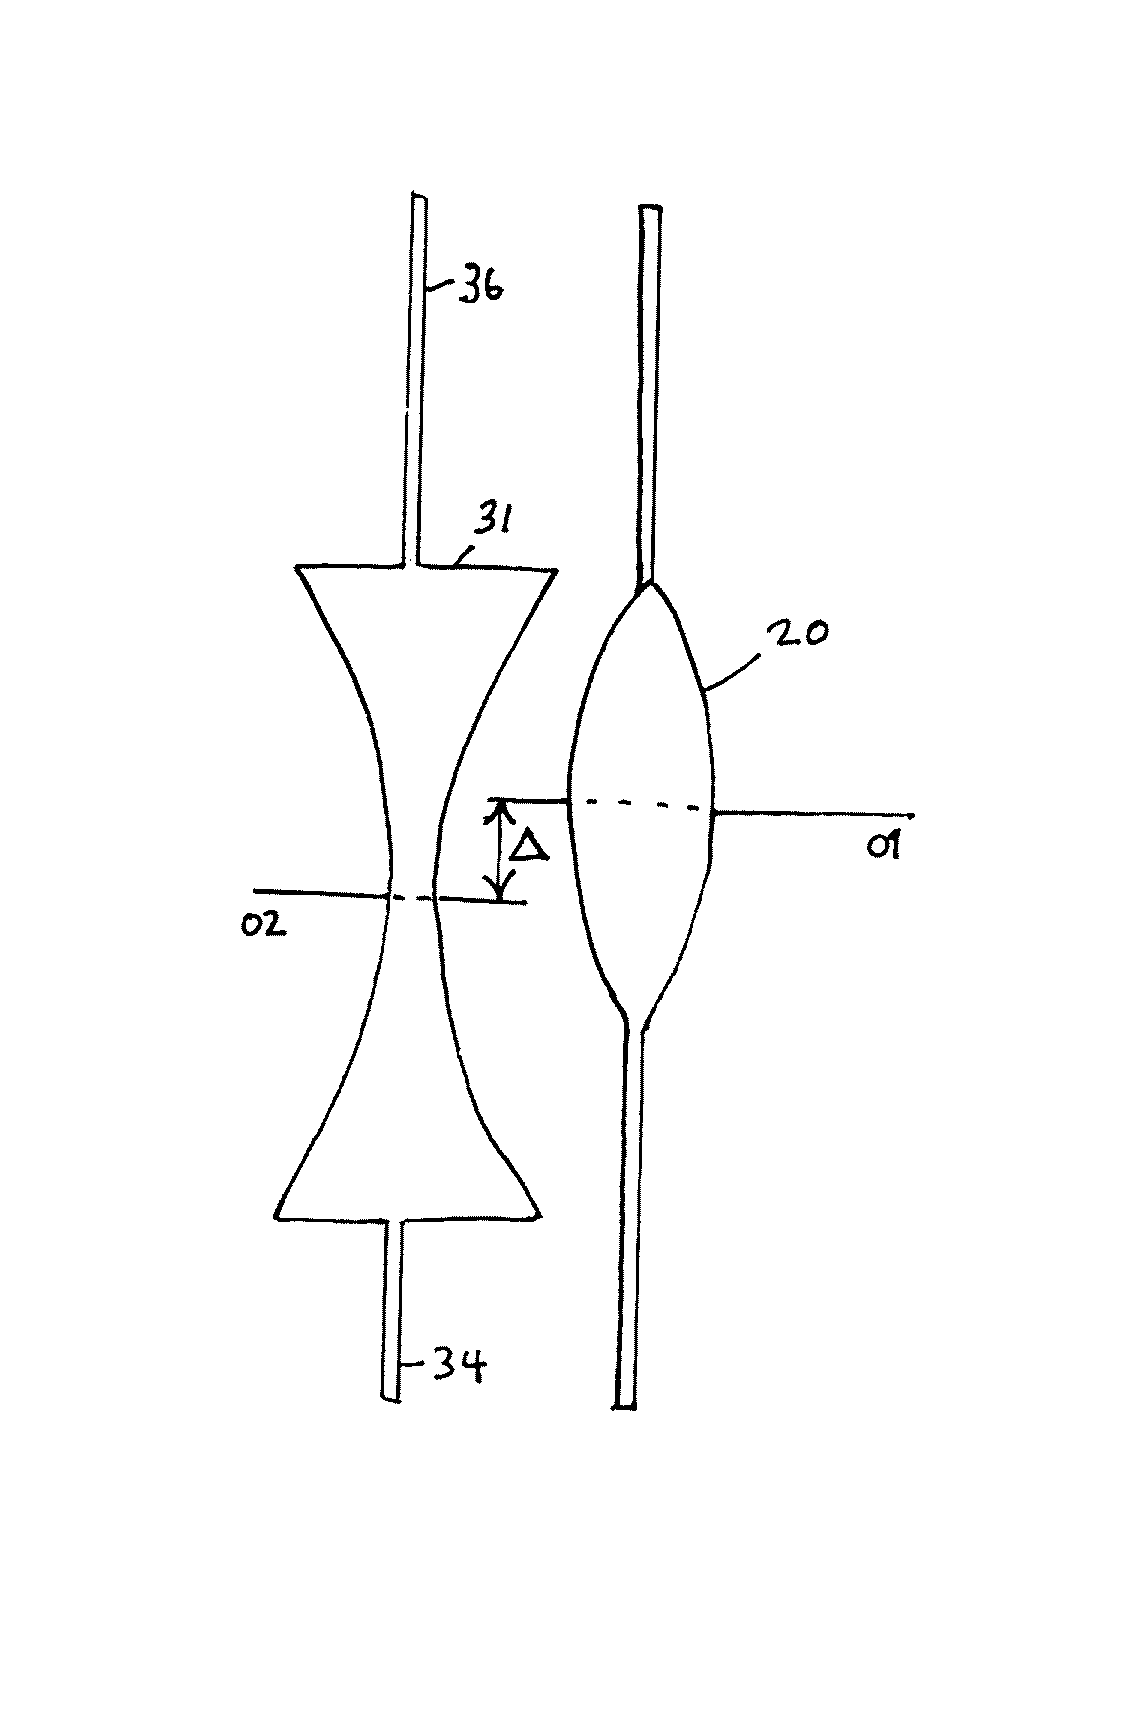 Intraocular lens systems and methods